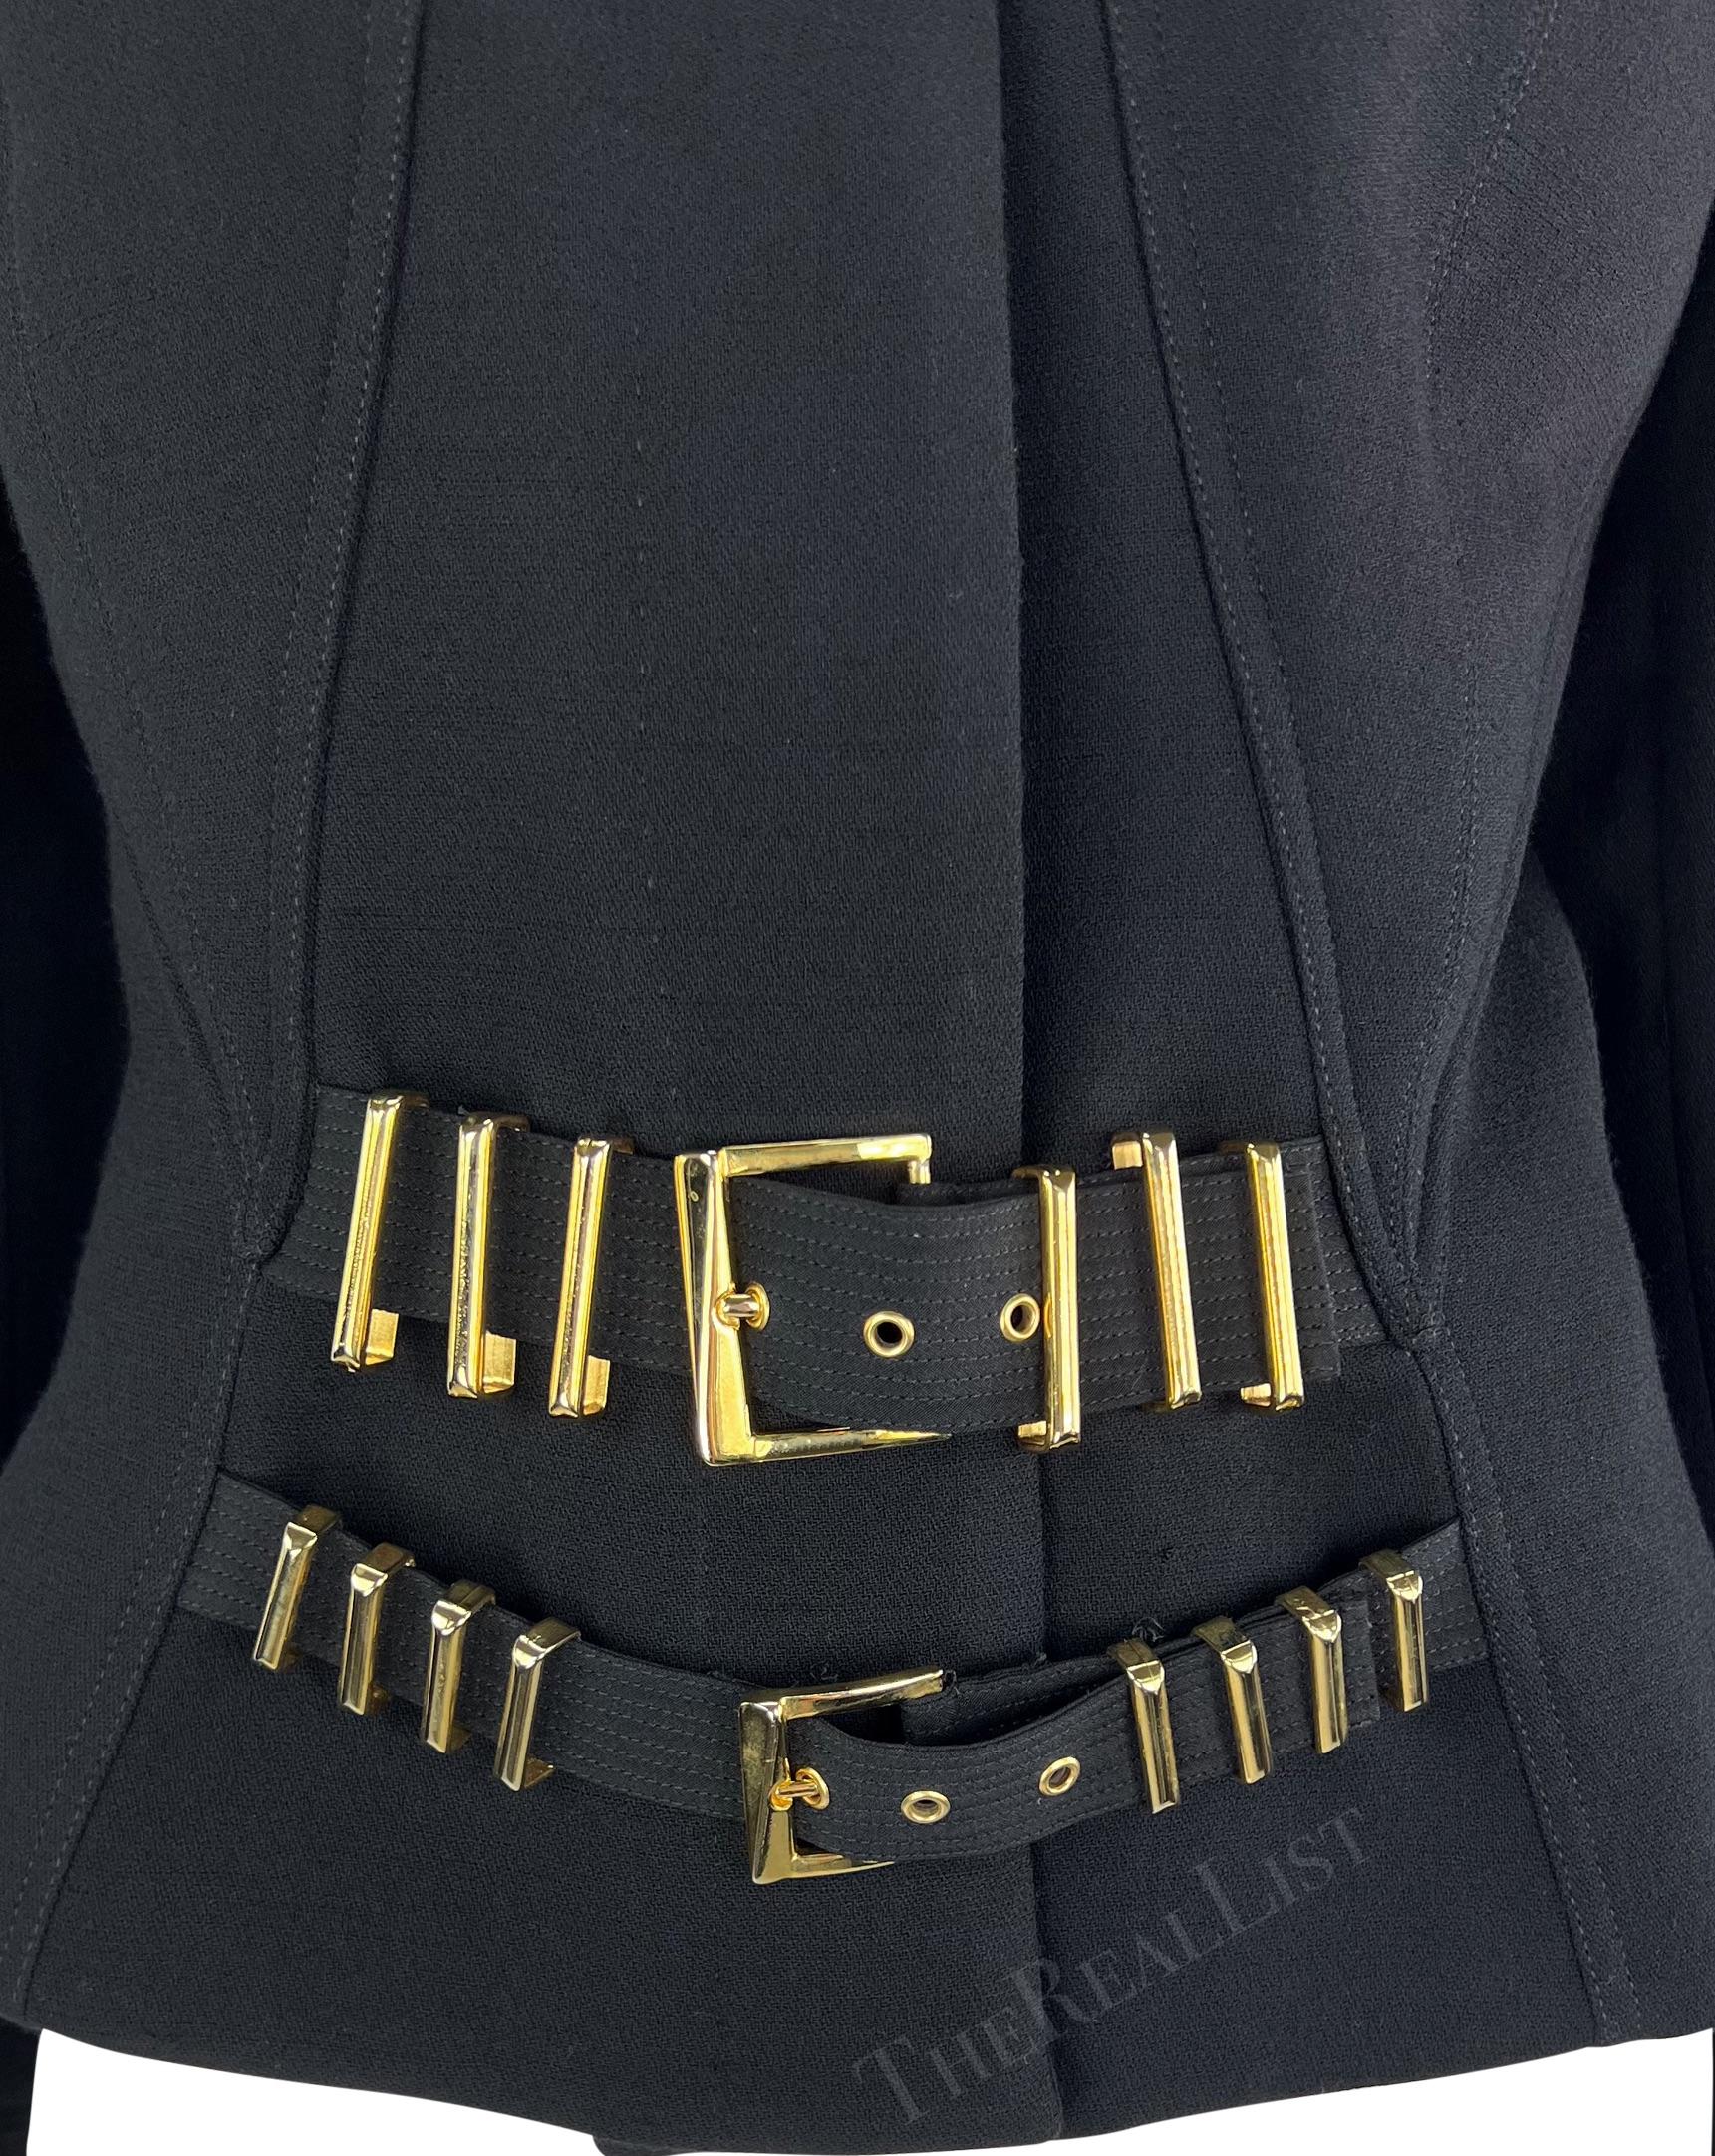 F/W 1992 Gianni Versace Runway Black 'Miss S&M' Bondage Buckle Jacket In Excellent Condition For Sale In West Hollywood, CA